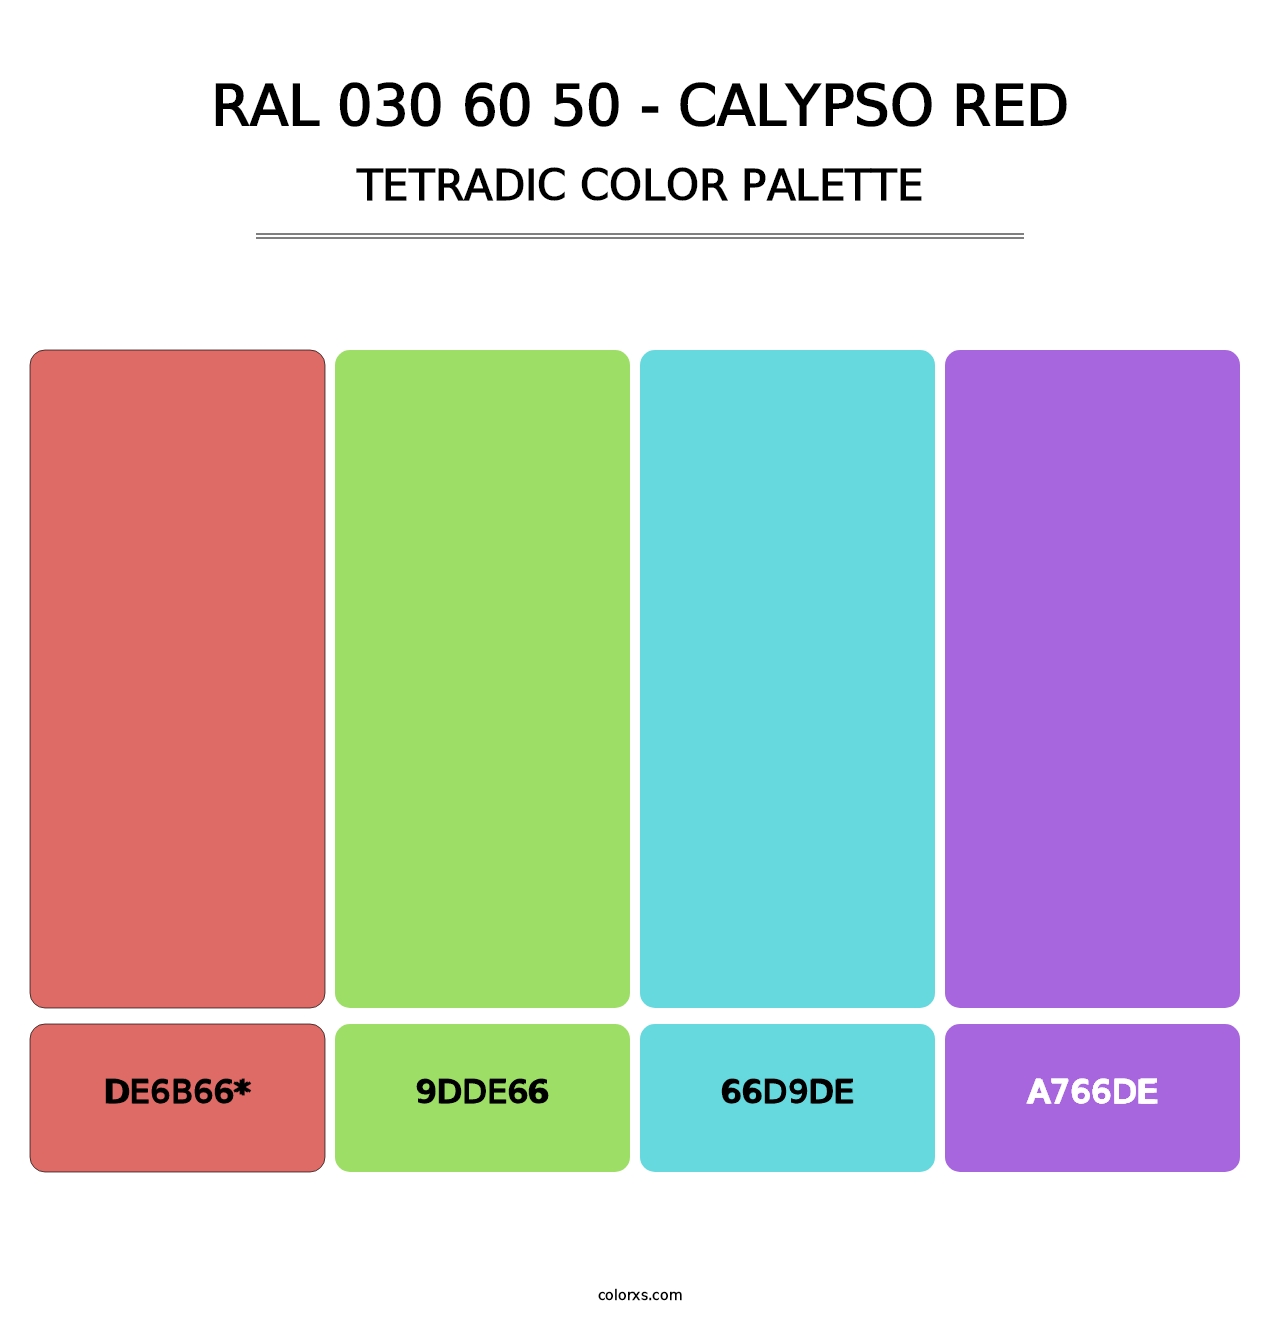 RAL 030 60 50 - Calypso Red - Tetradic Color Palette